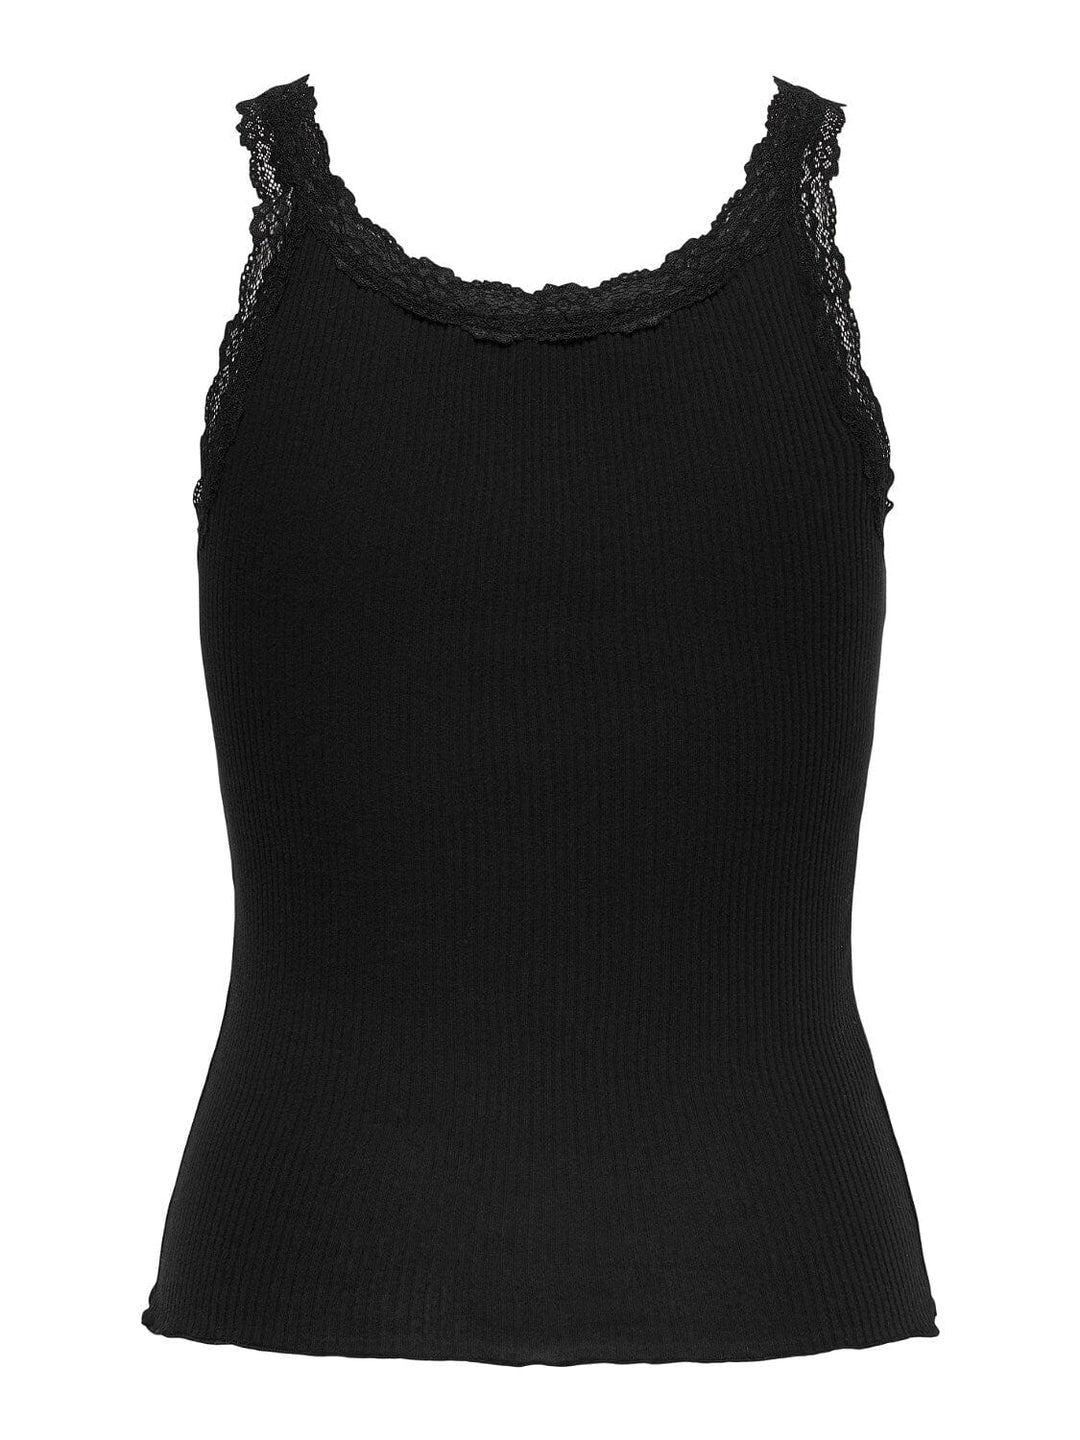 Only - Onlsharai Lace Tank Top - Black Toppe 